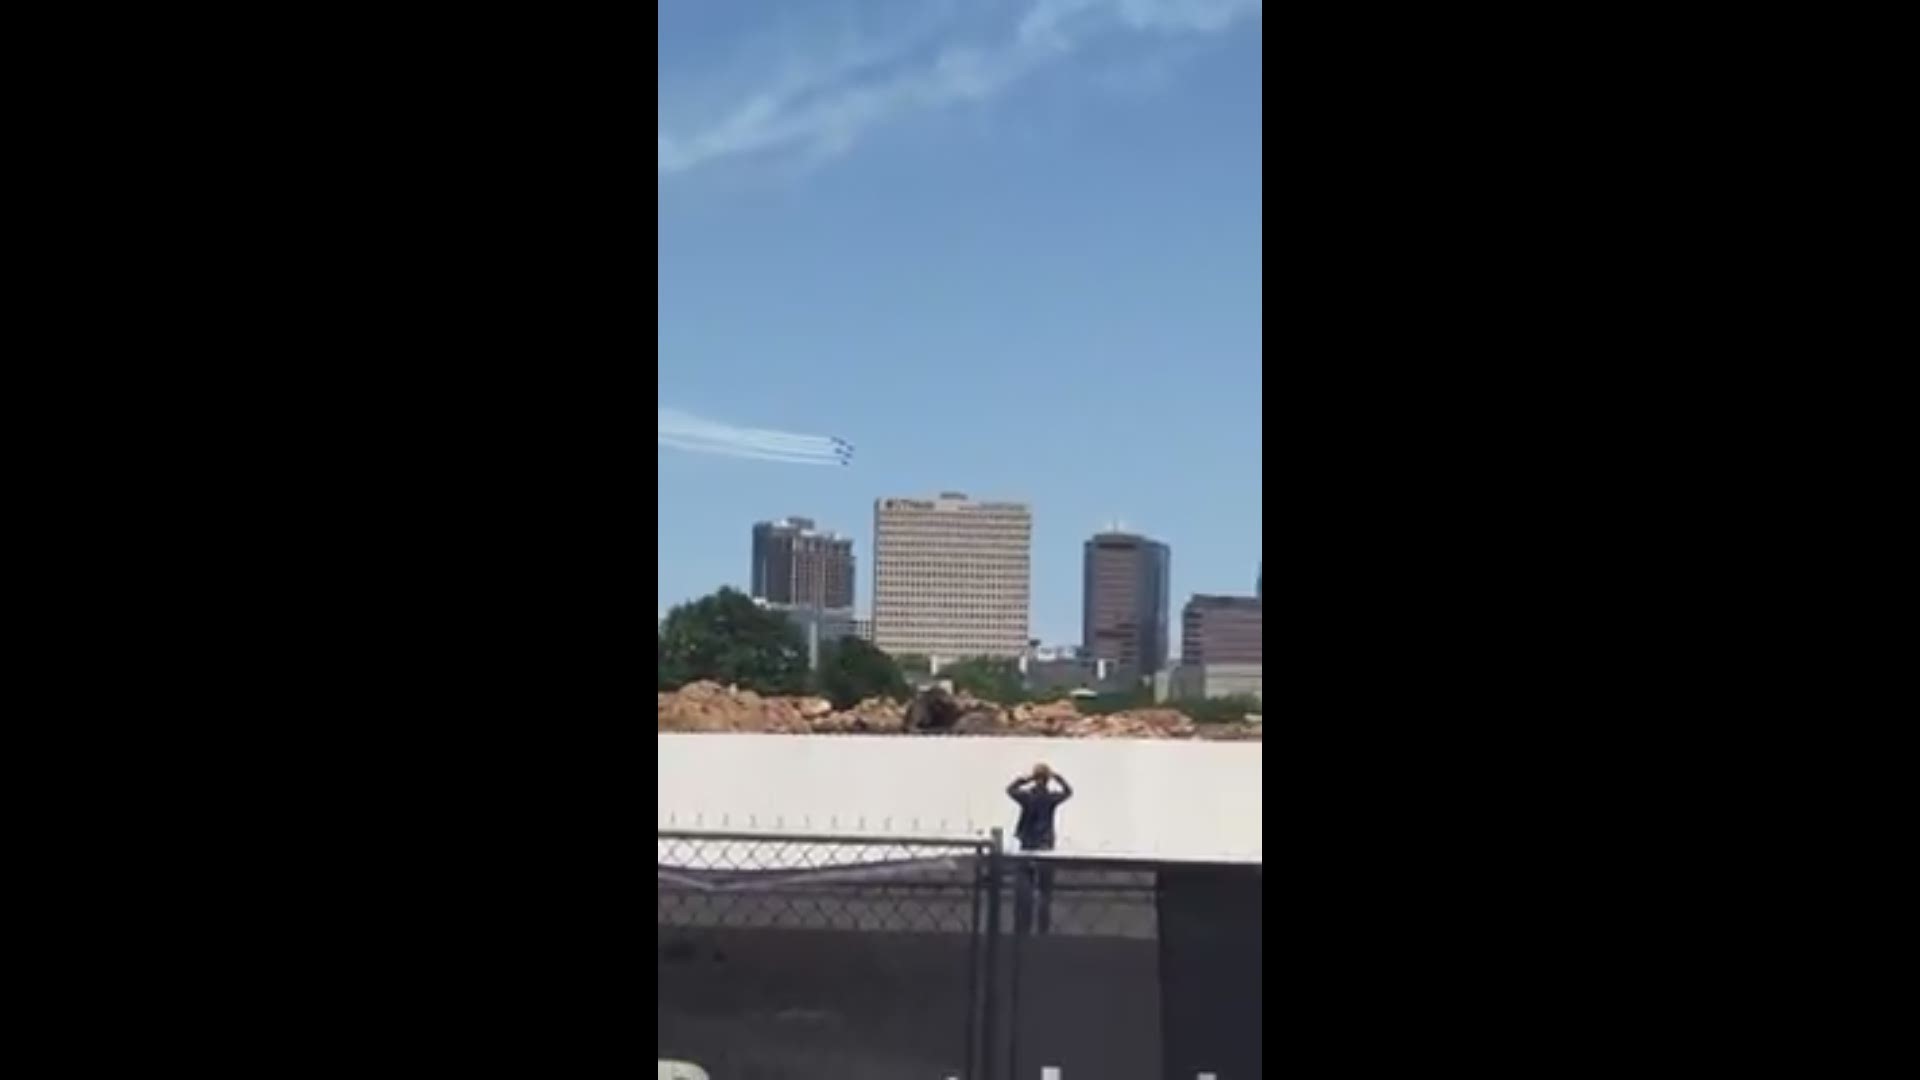 Zachary Beechinor shot this video of the Blue Angels flying through the Texas Medical Center.